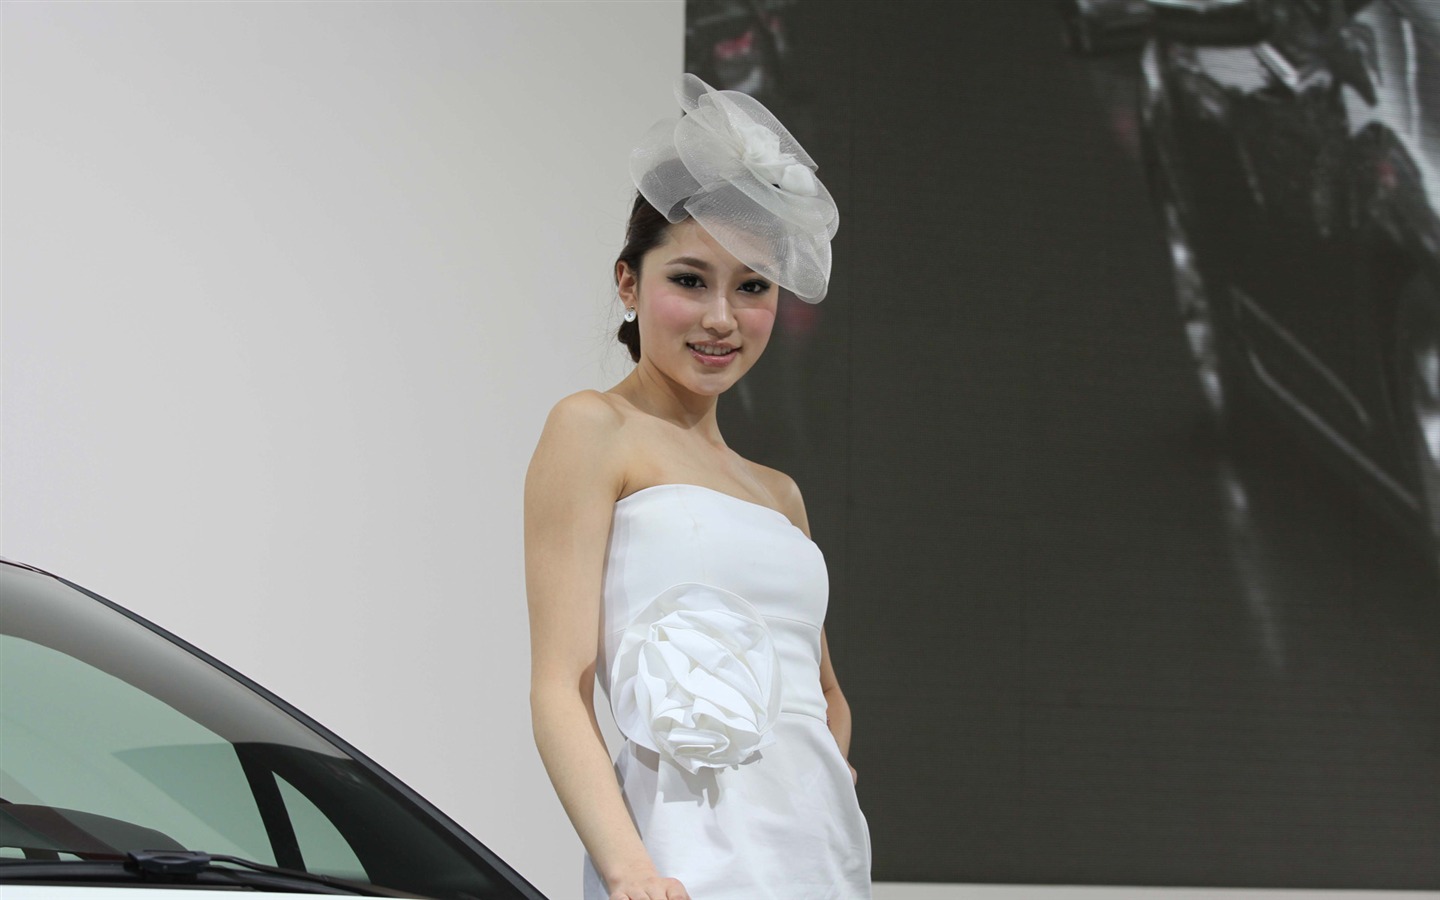 2010 Beijing International Auto Show beauty (2) (the wind chasing the clouds works) #31 - 1440x900